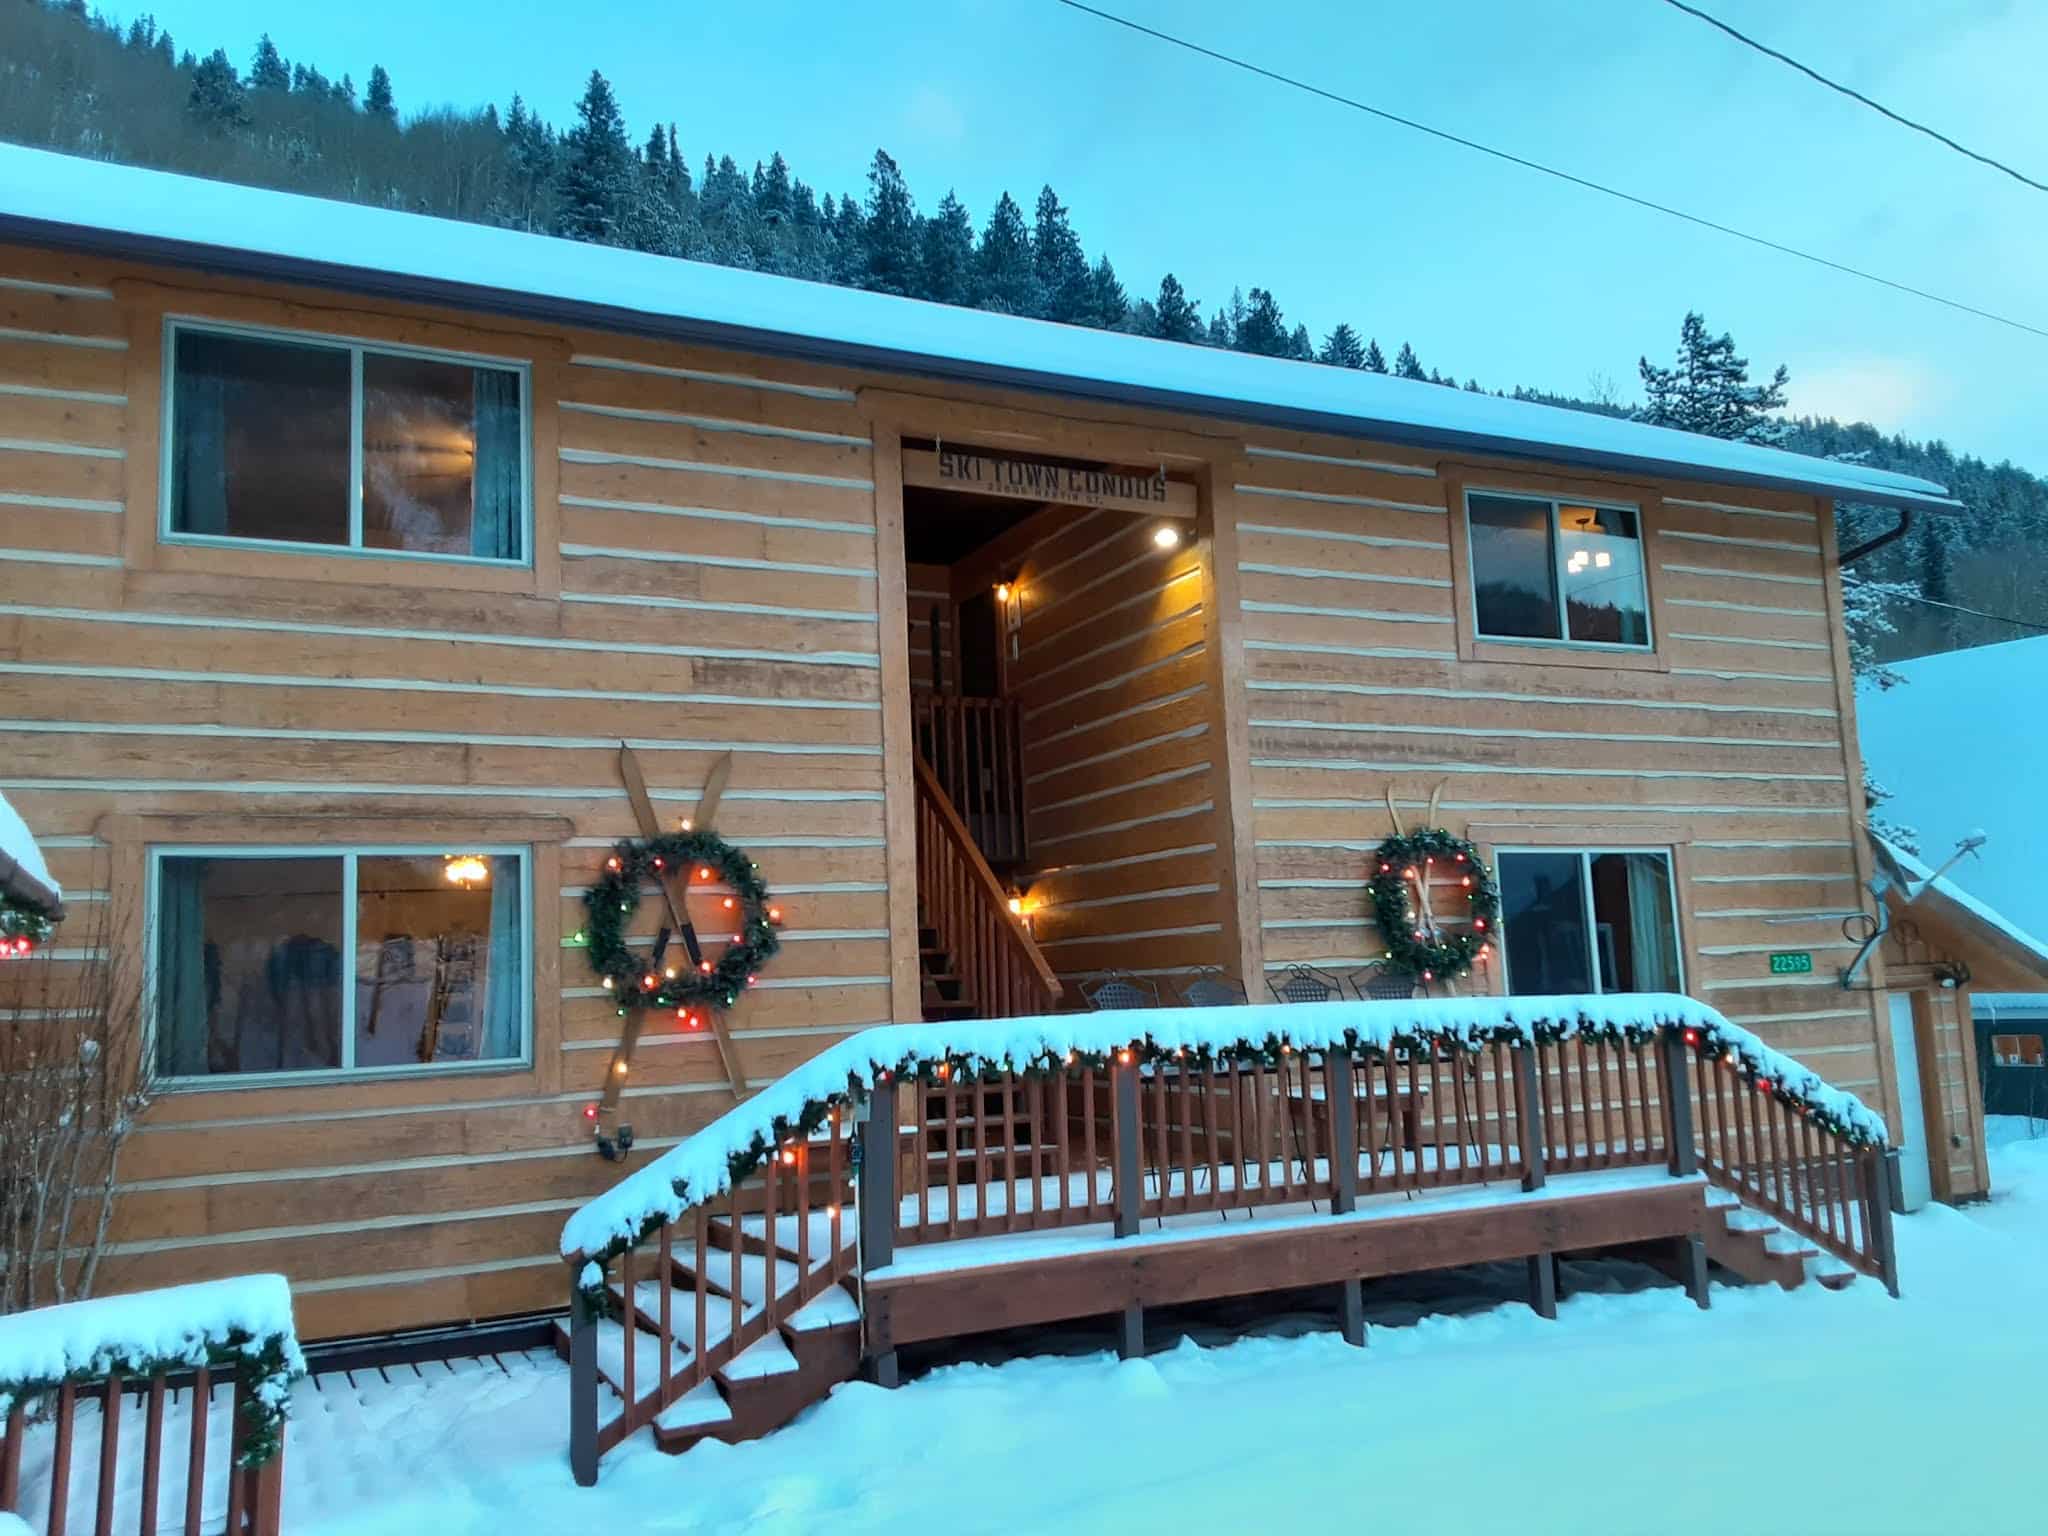 Exterior mountain lodge with garland and Christmas wreaths.